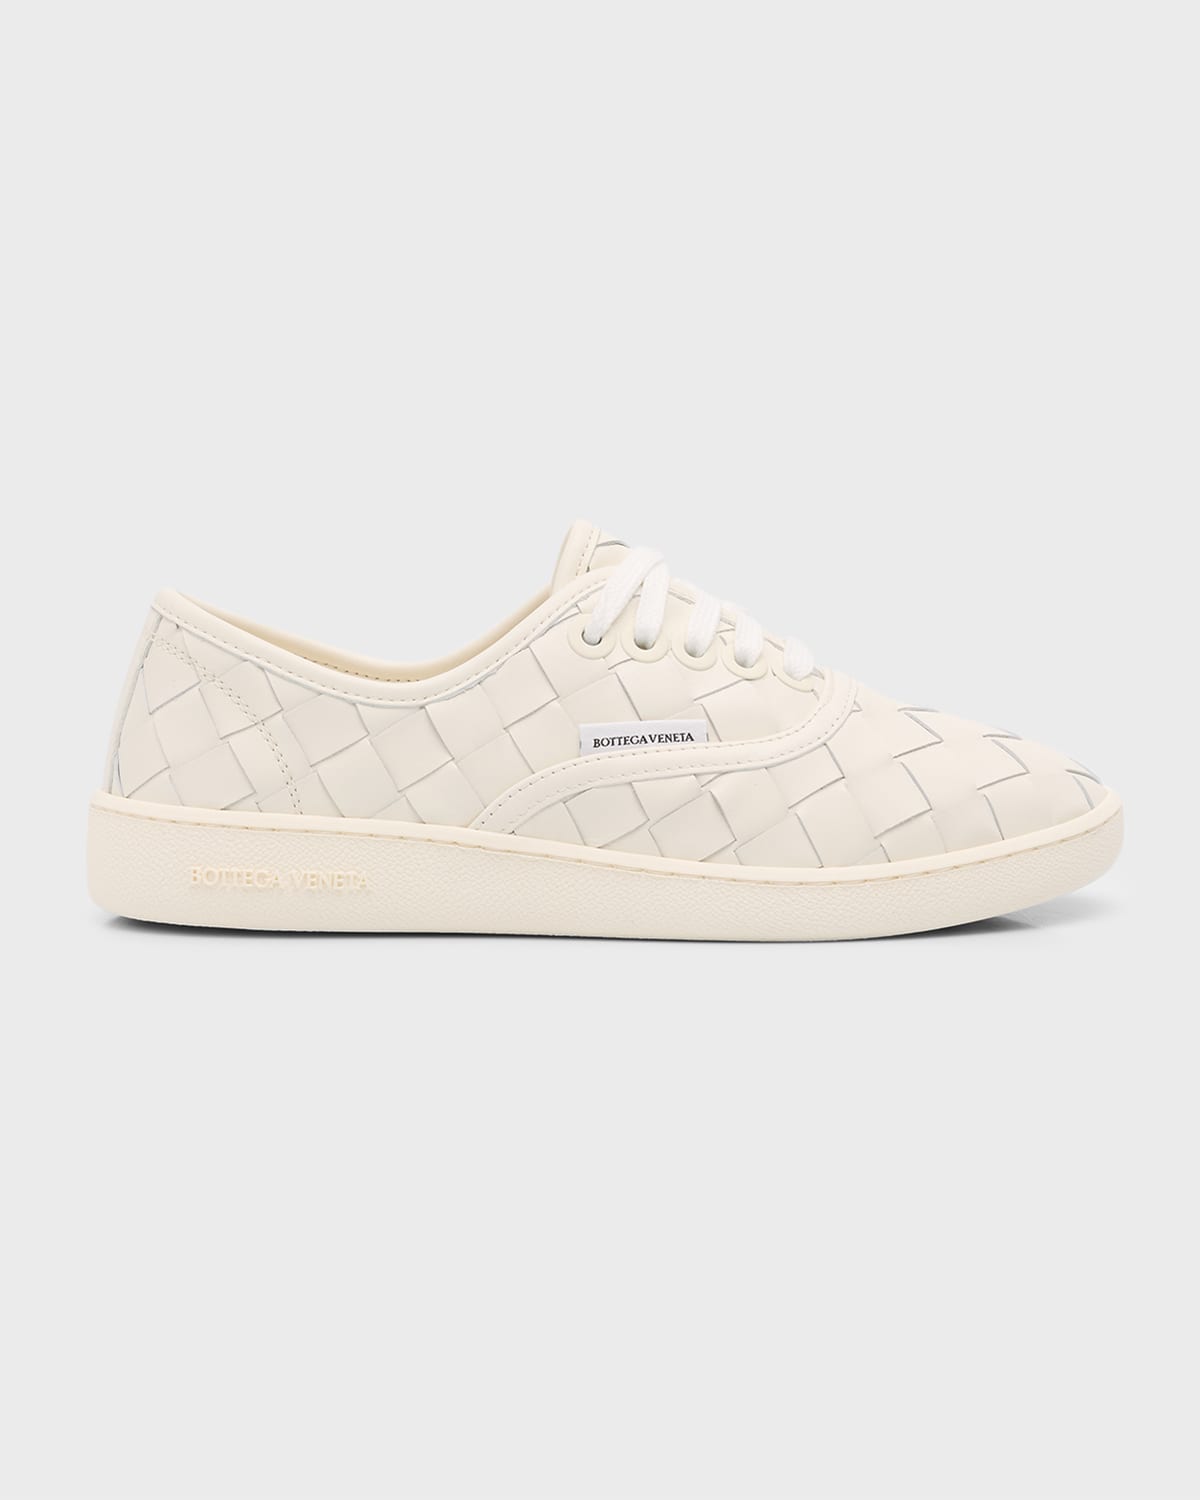 Sawyer Intrecciato Leather Low-Top Sneakers